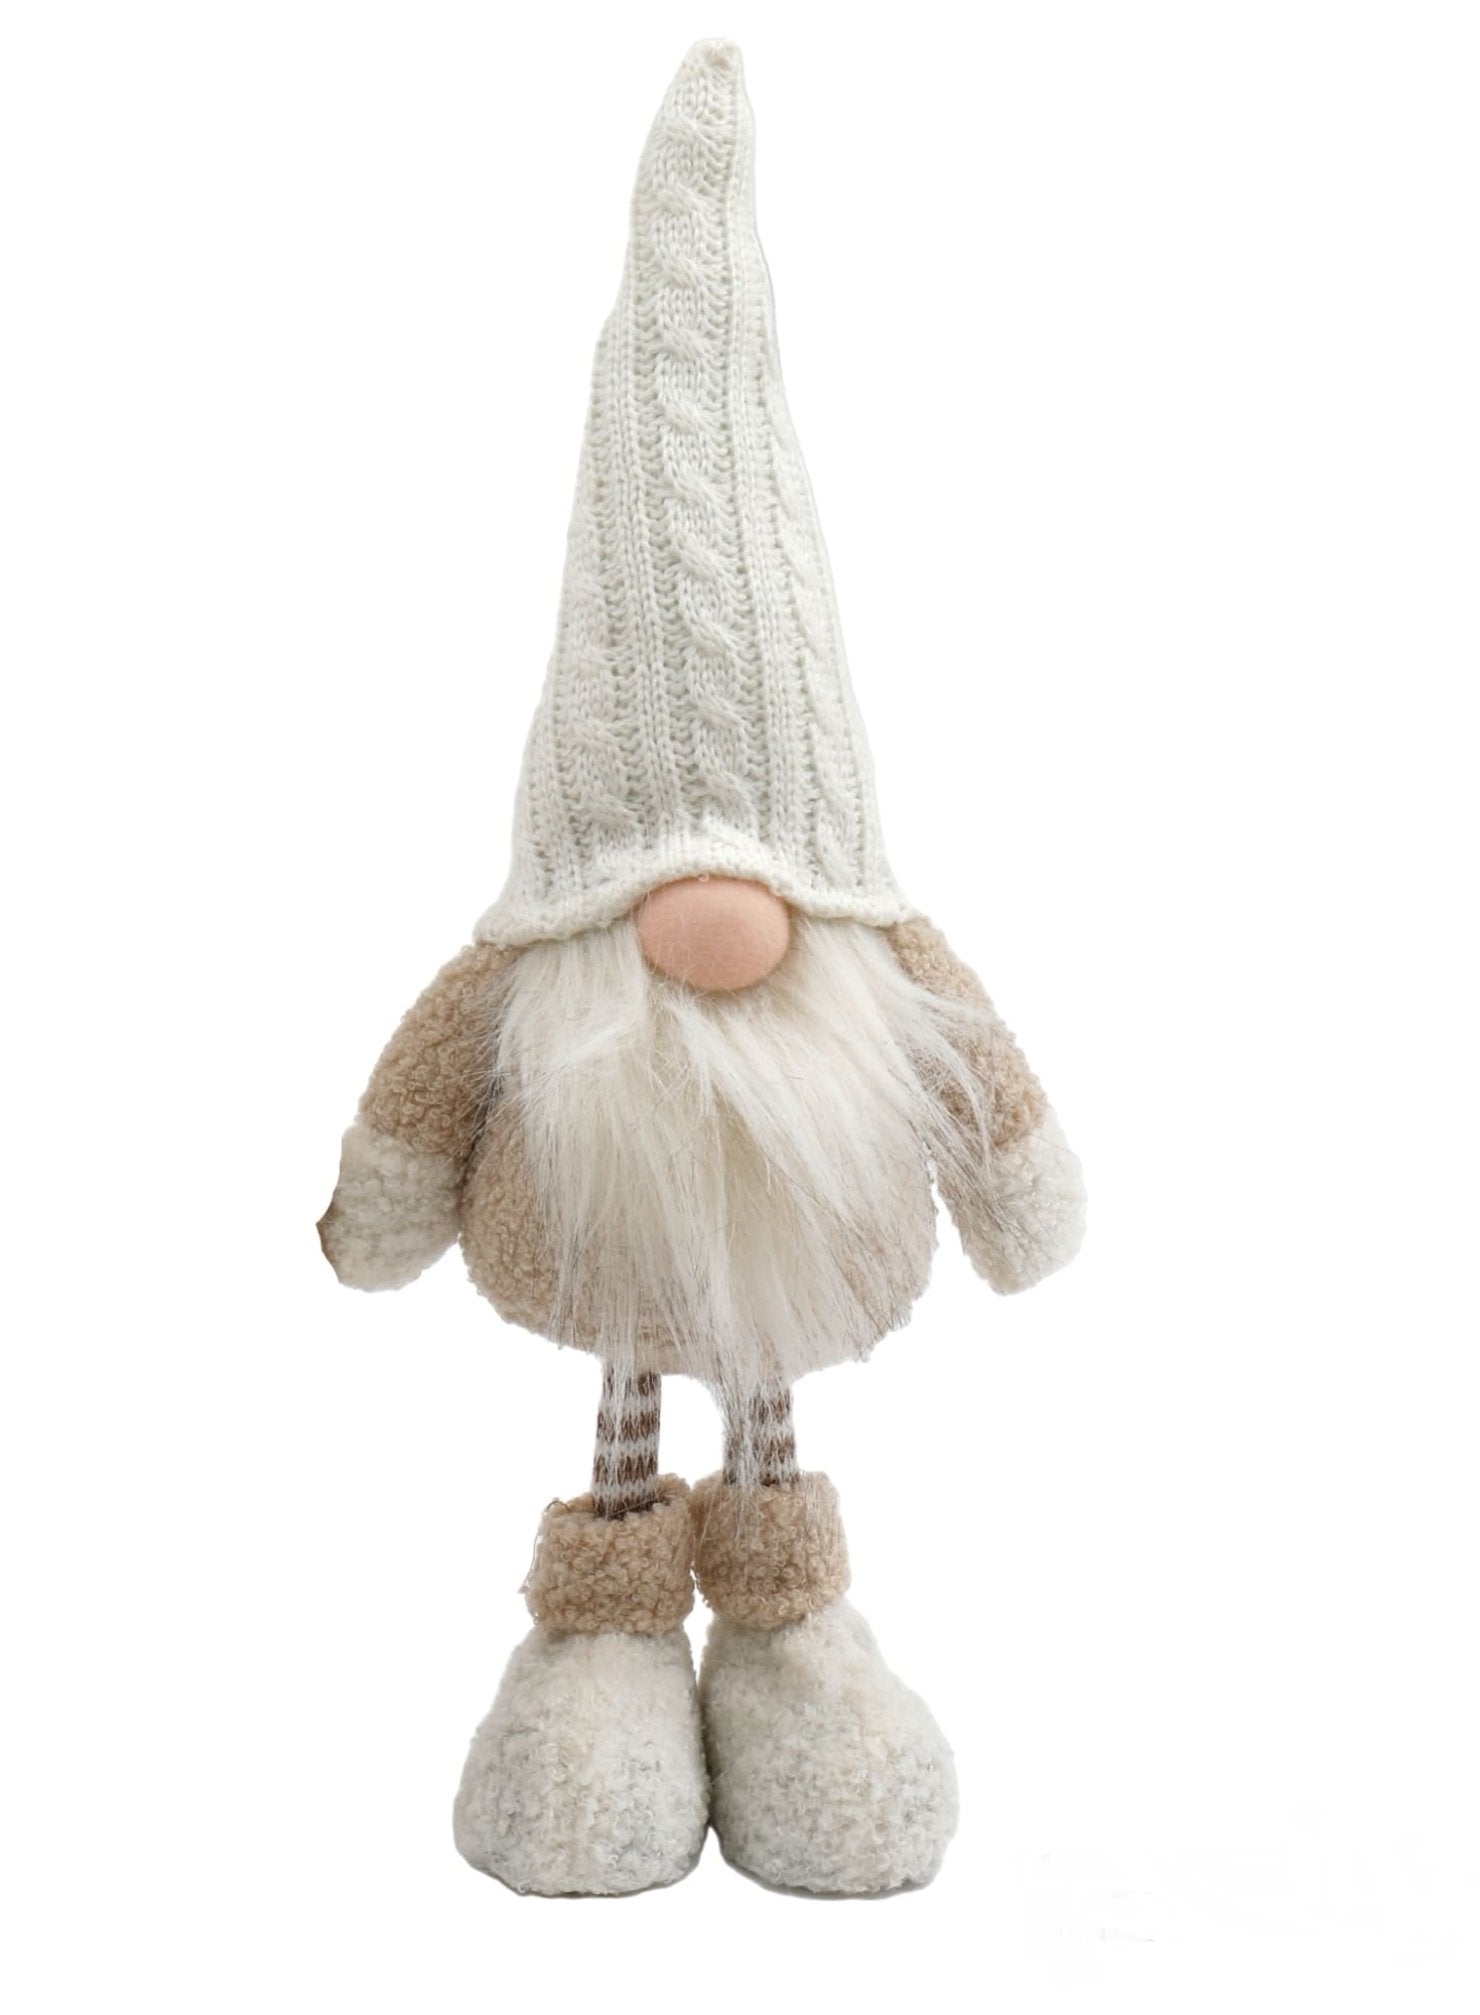 View Standing Gonk With White Knitted Hat information